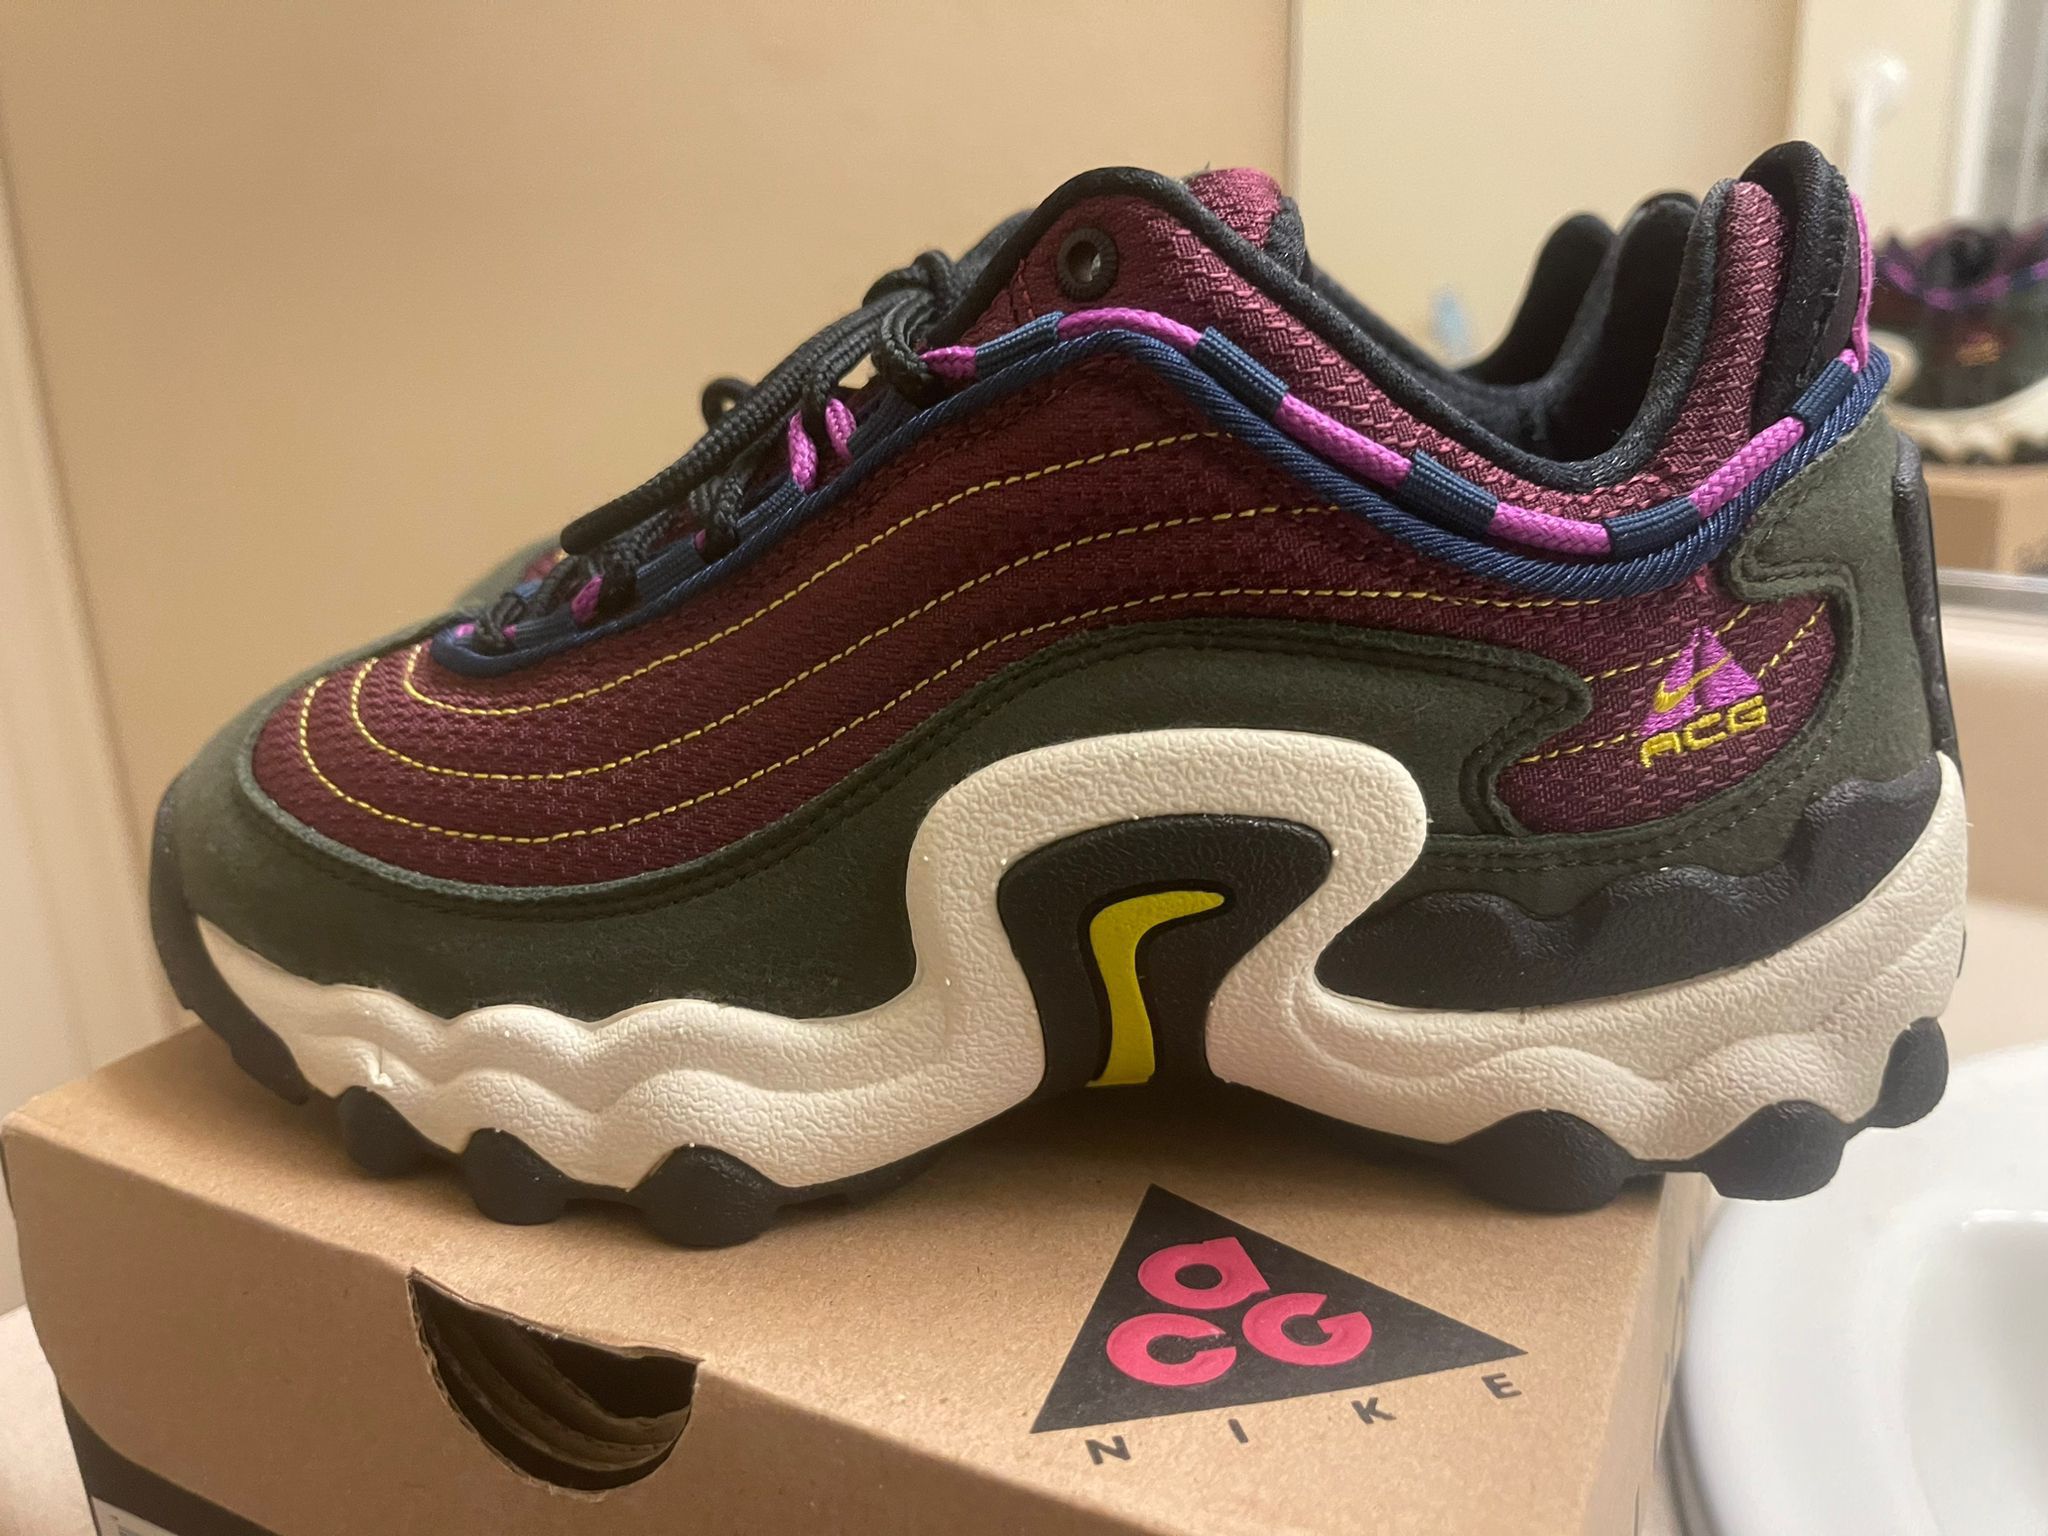 Nike Air Skarn ACG Sequoia Bordeaux for Sale in Chino, CA - OfferUp